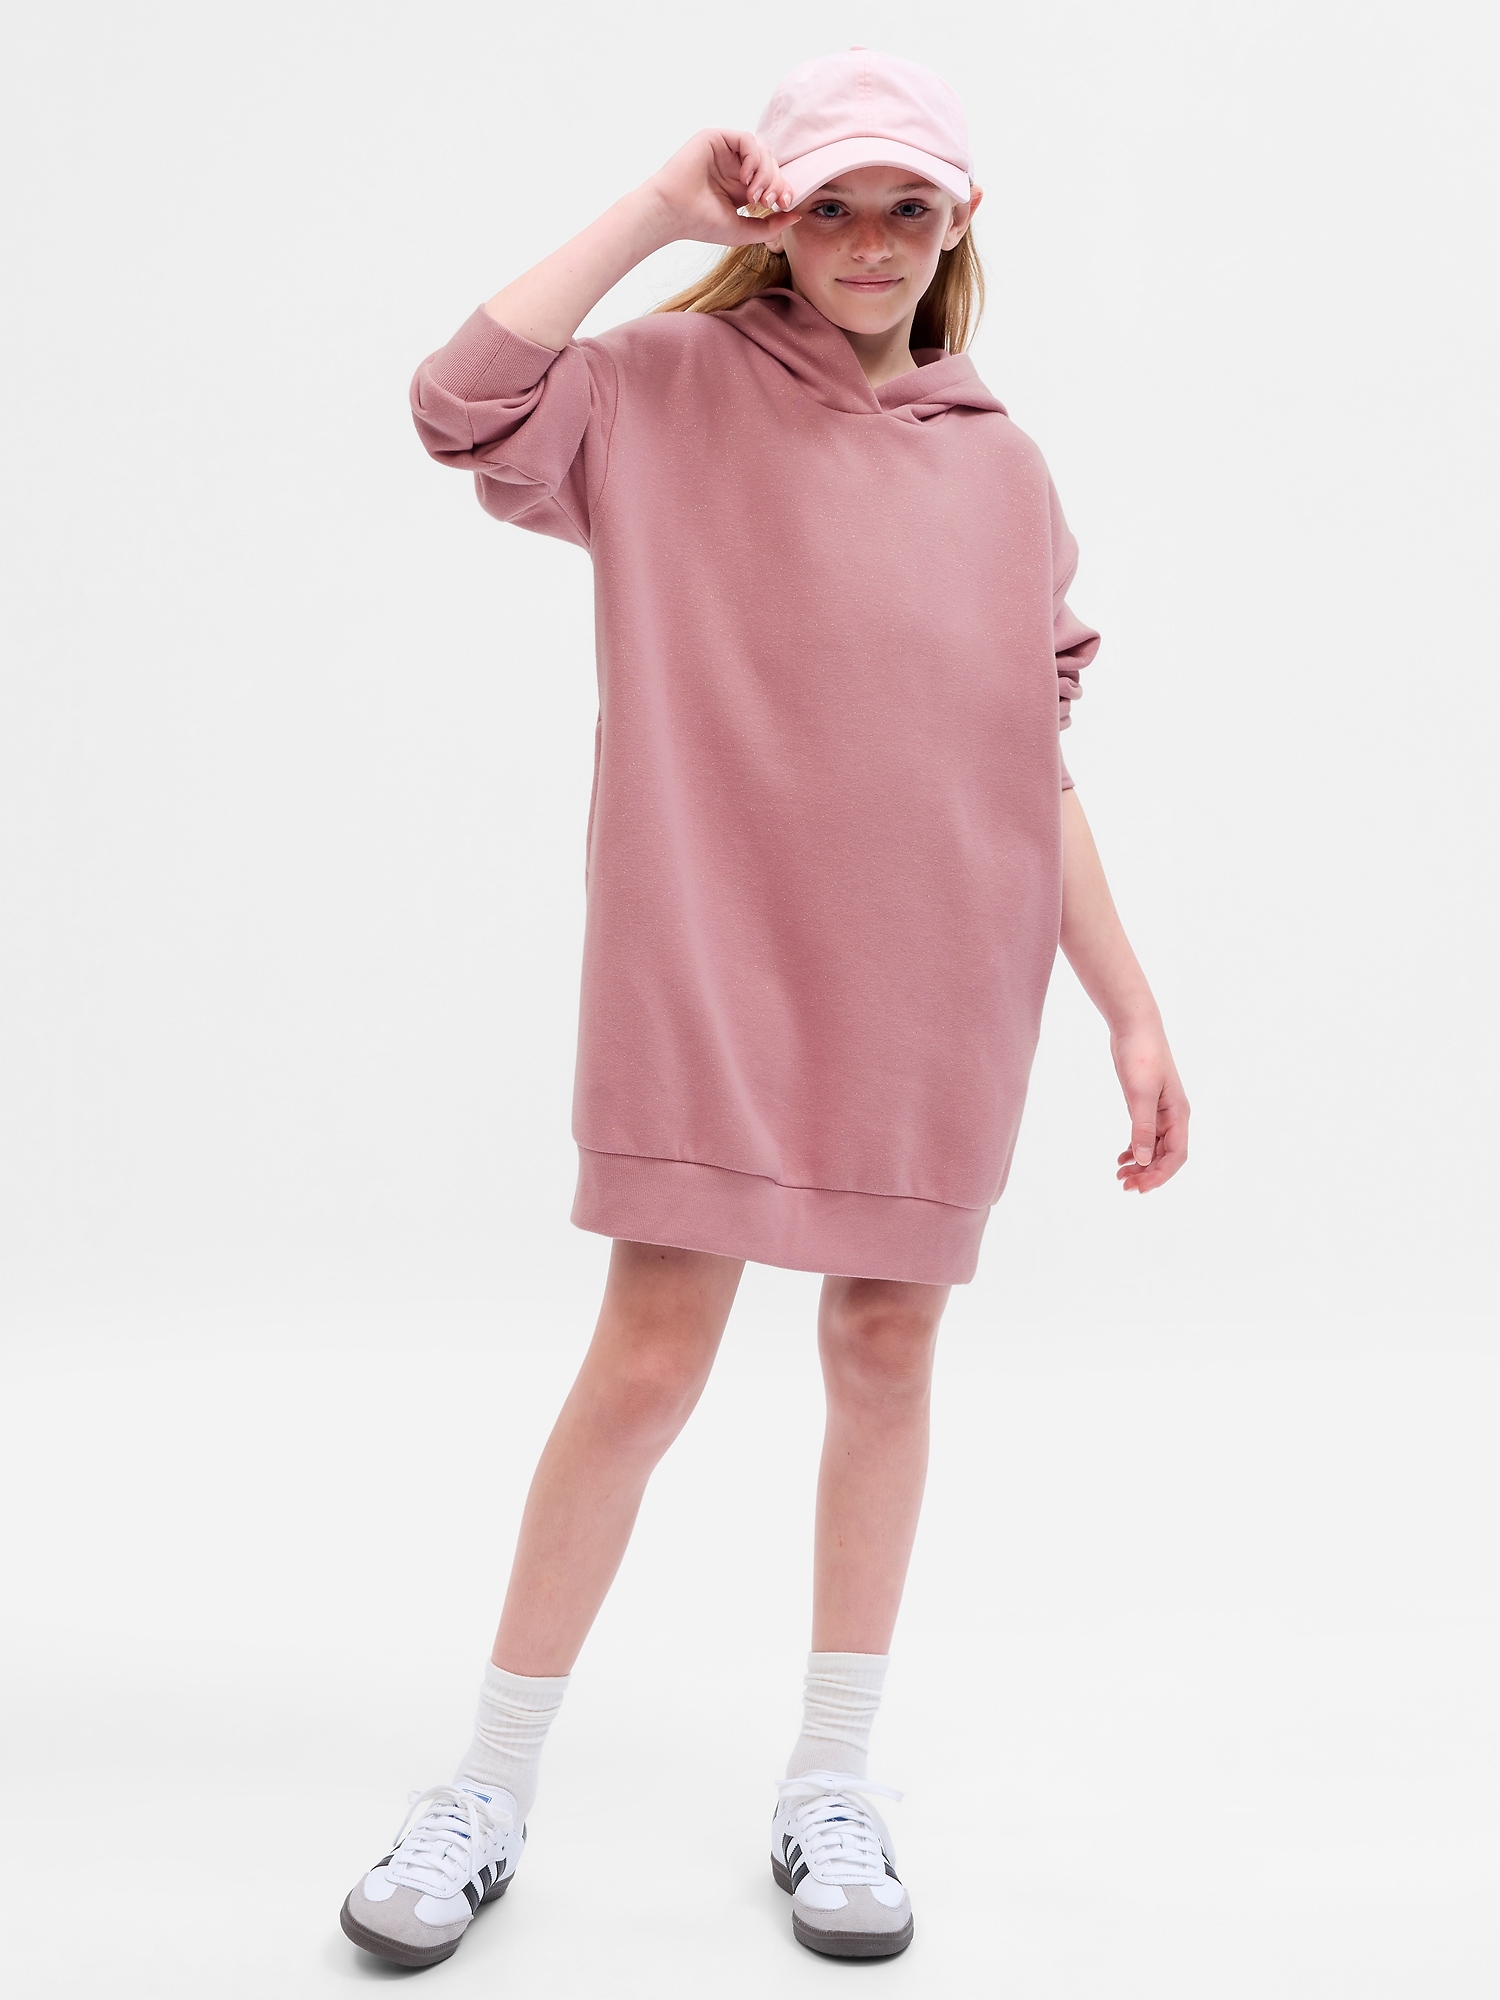 Girls Clothes – Dresses, Hoodies, Sweaters and School Wear